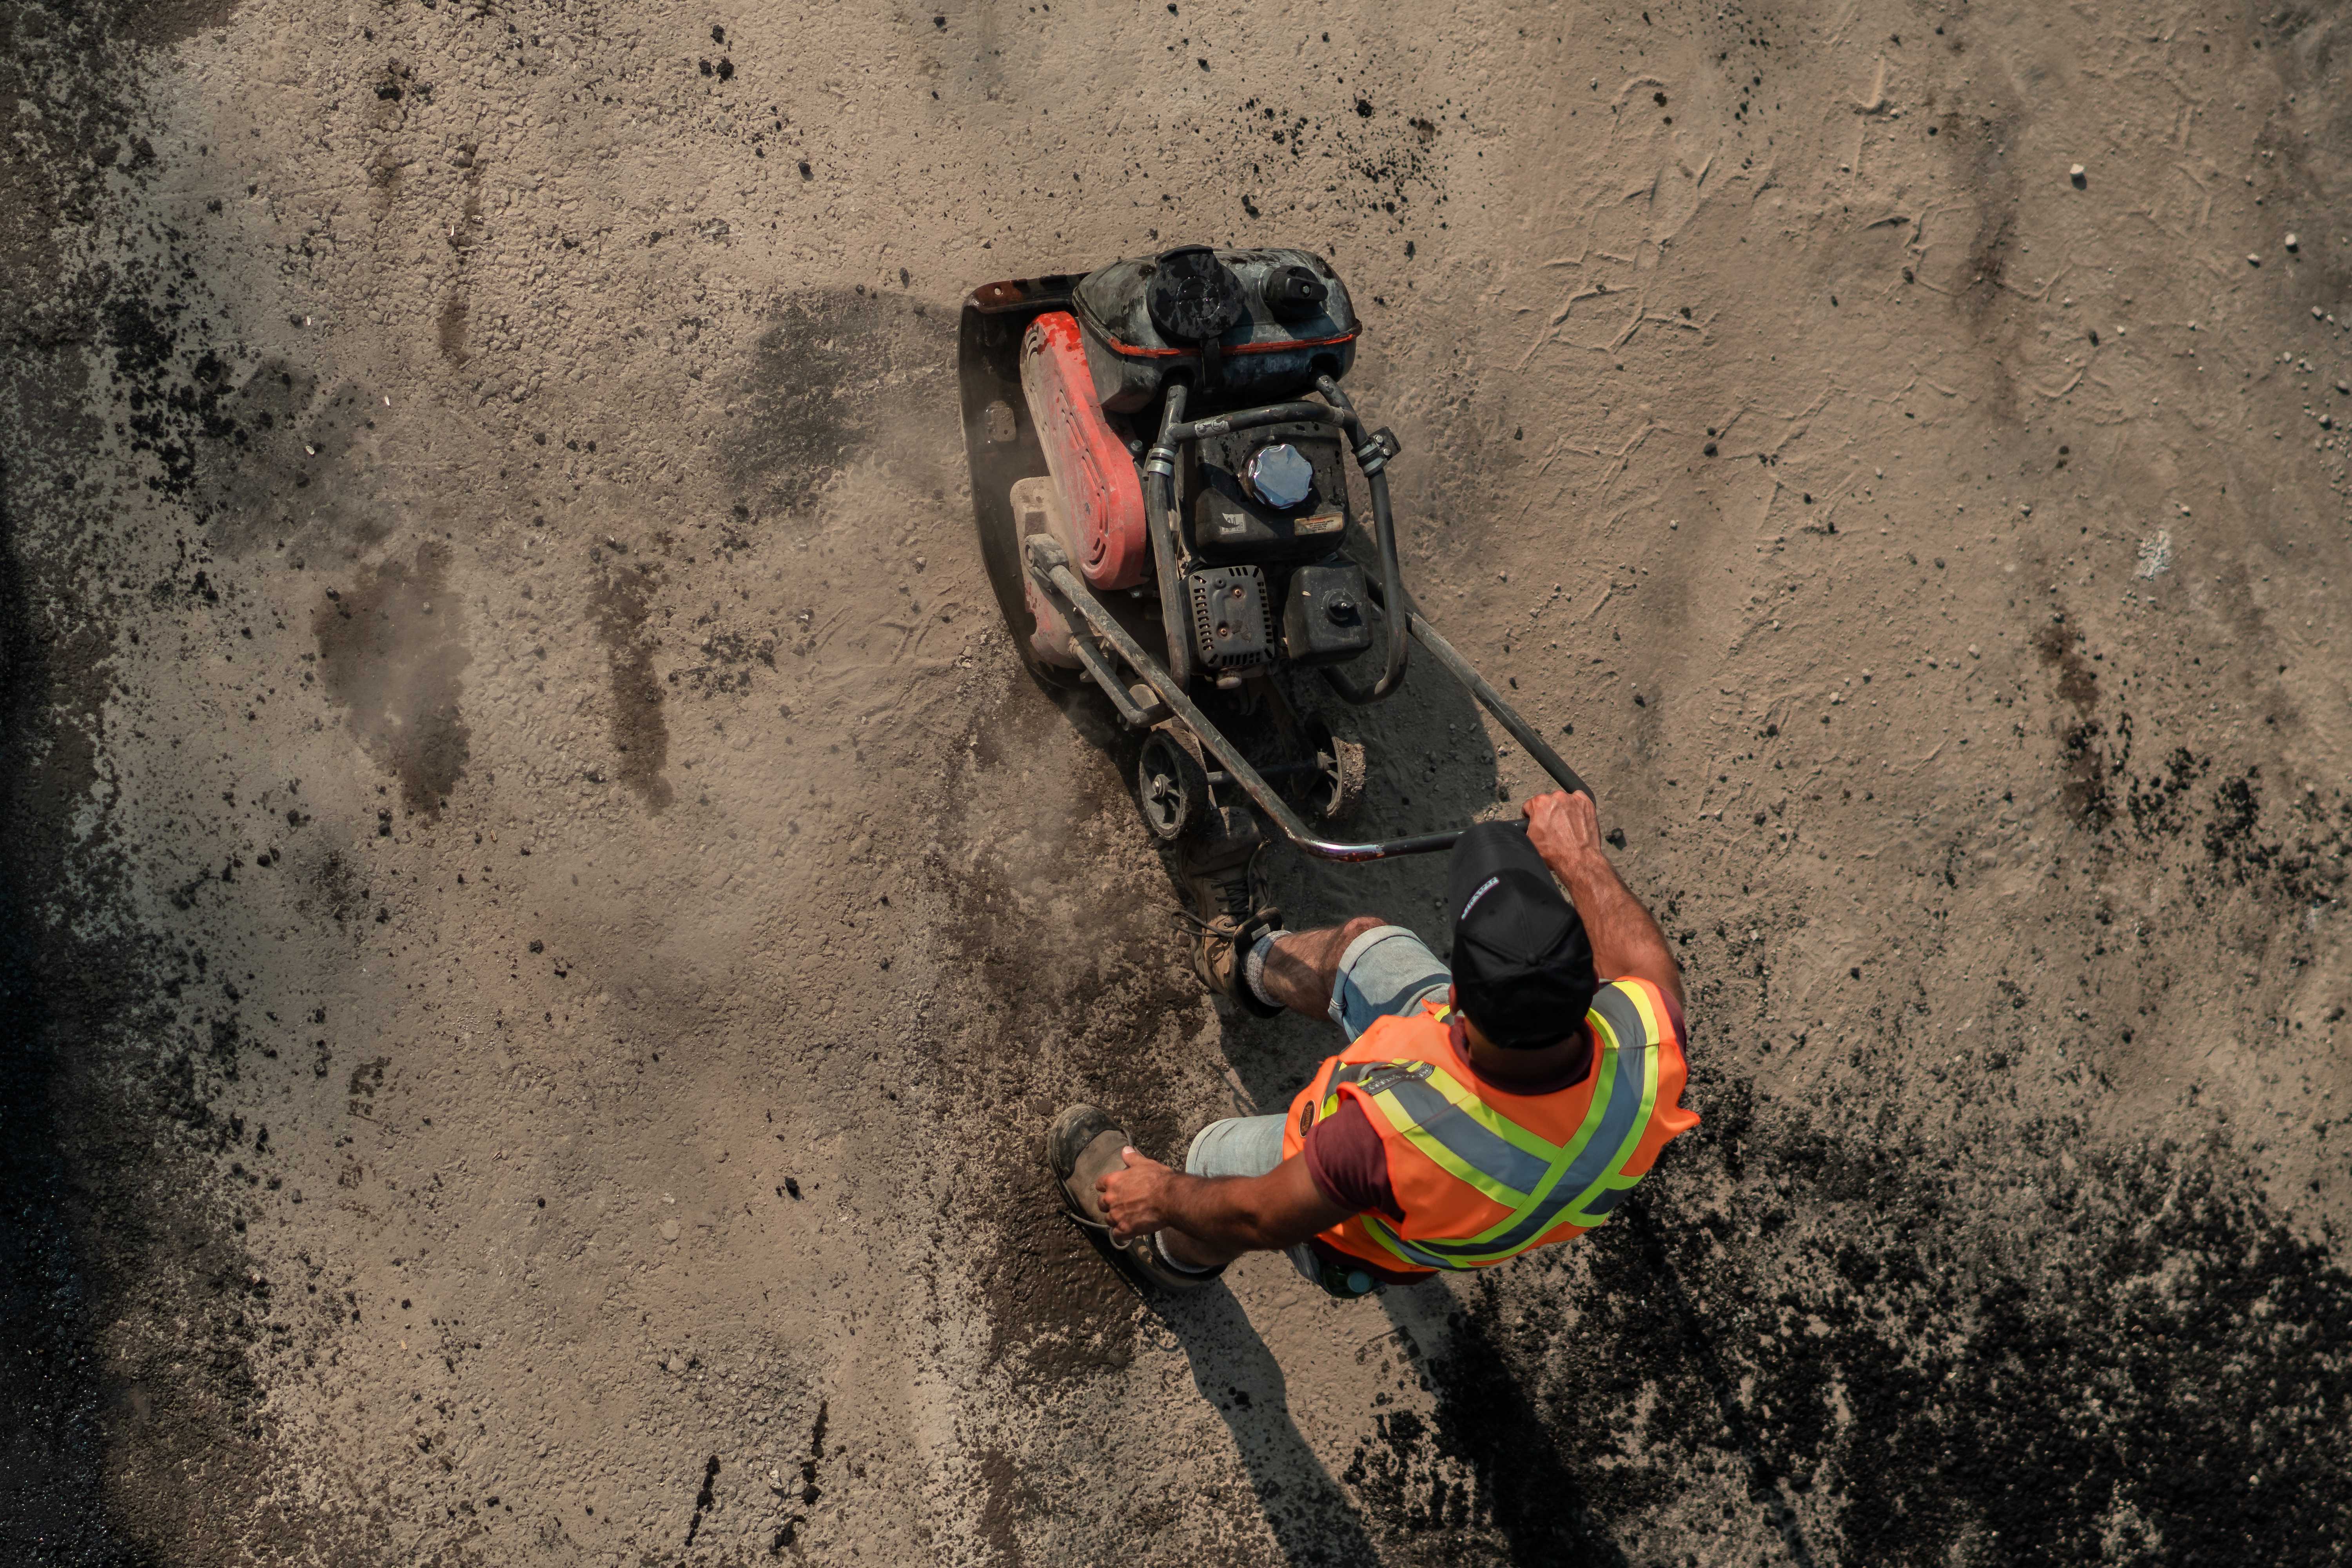 Overhead view of a contstruction worker sanding a rough road surface with a piece of equipment.